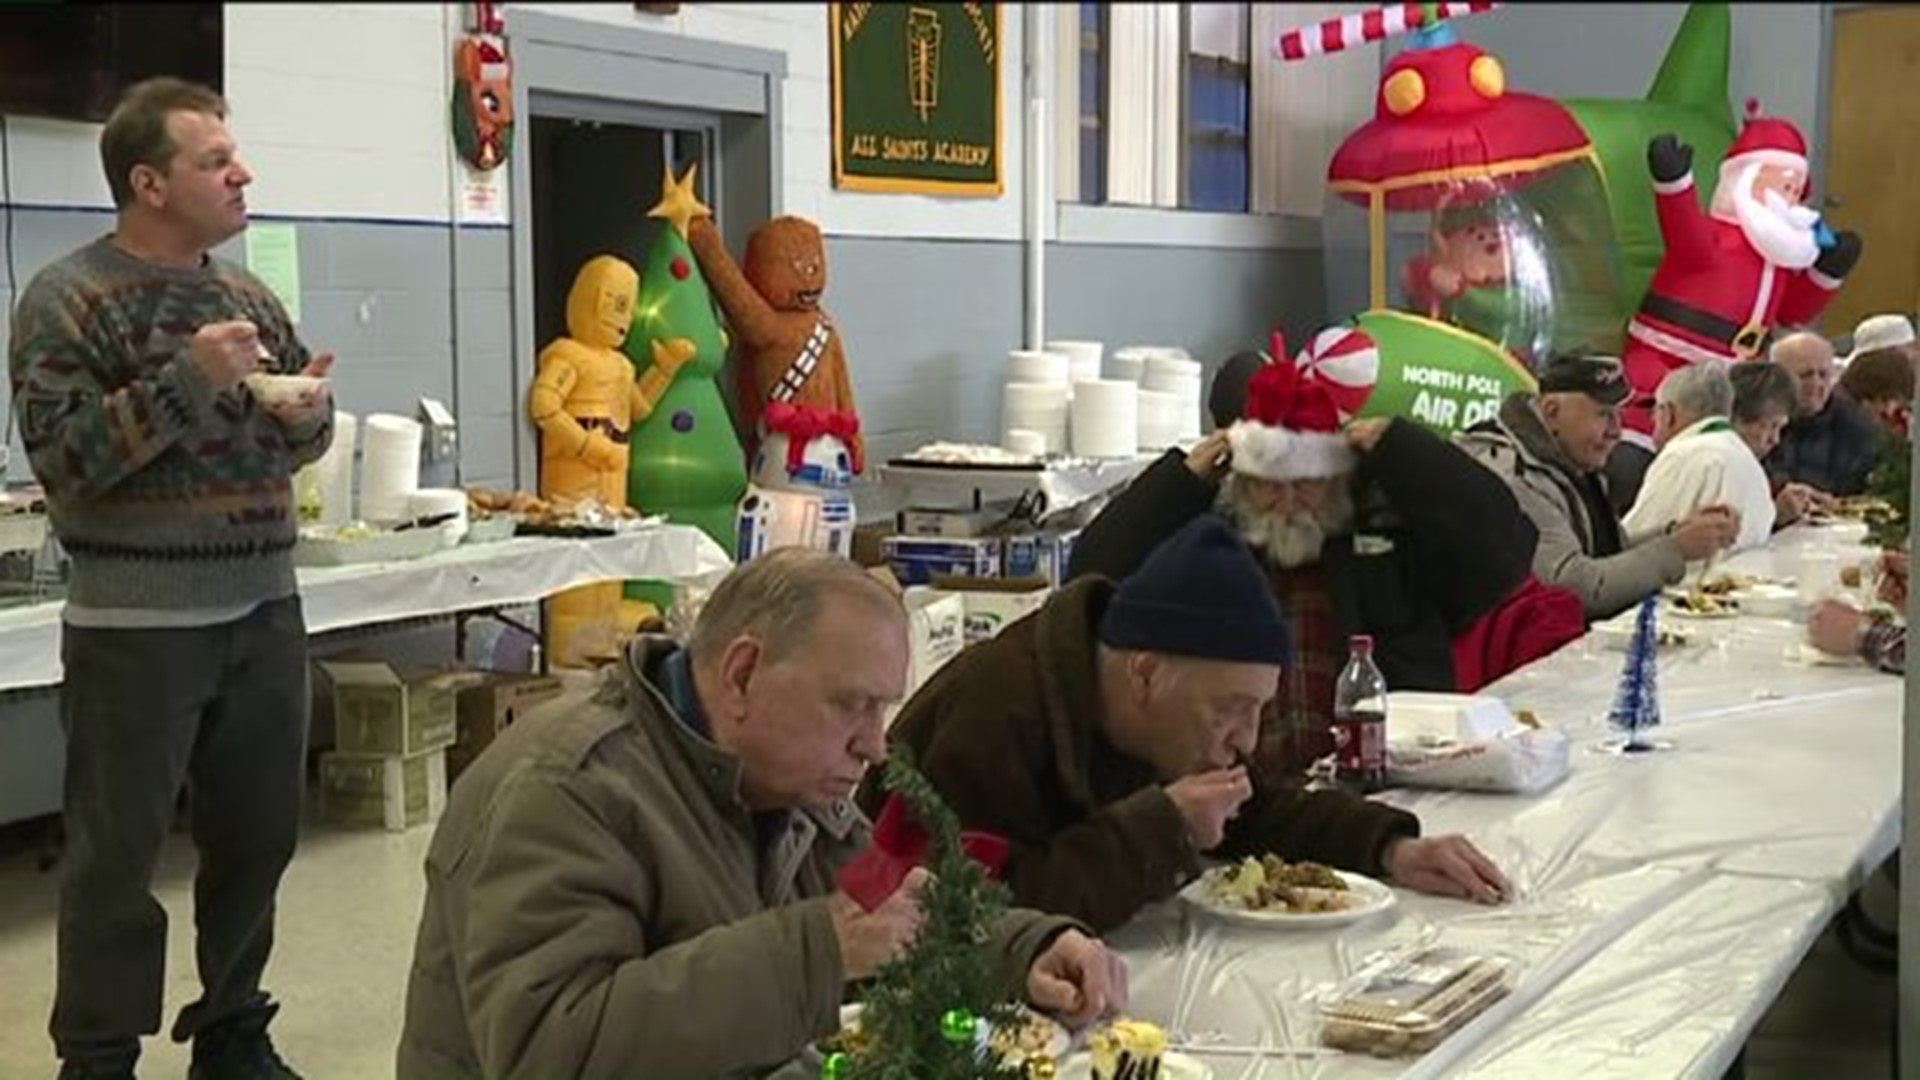 Annual Dinner Spreads Holiday Cheer in Scranton